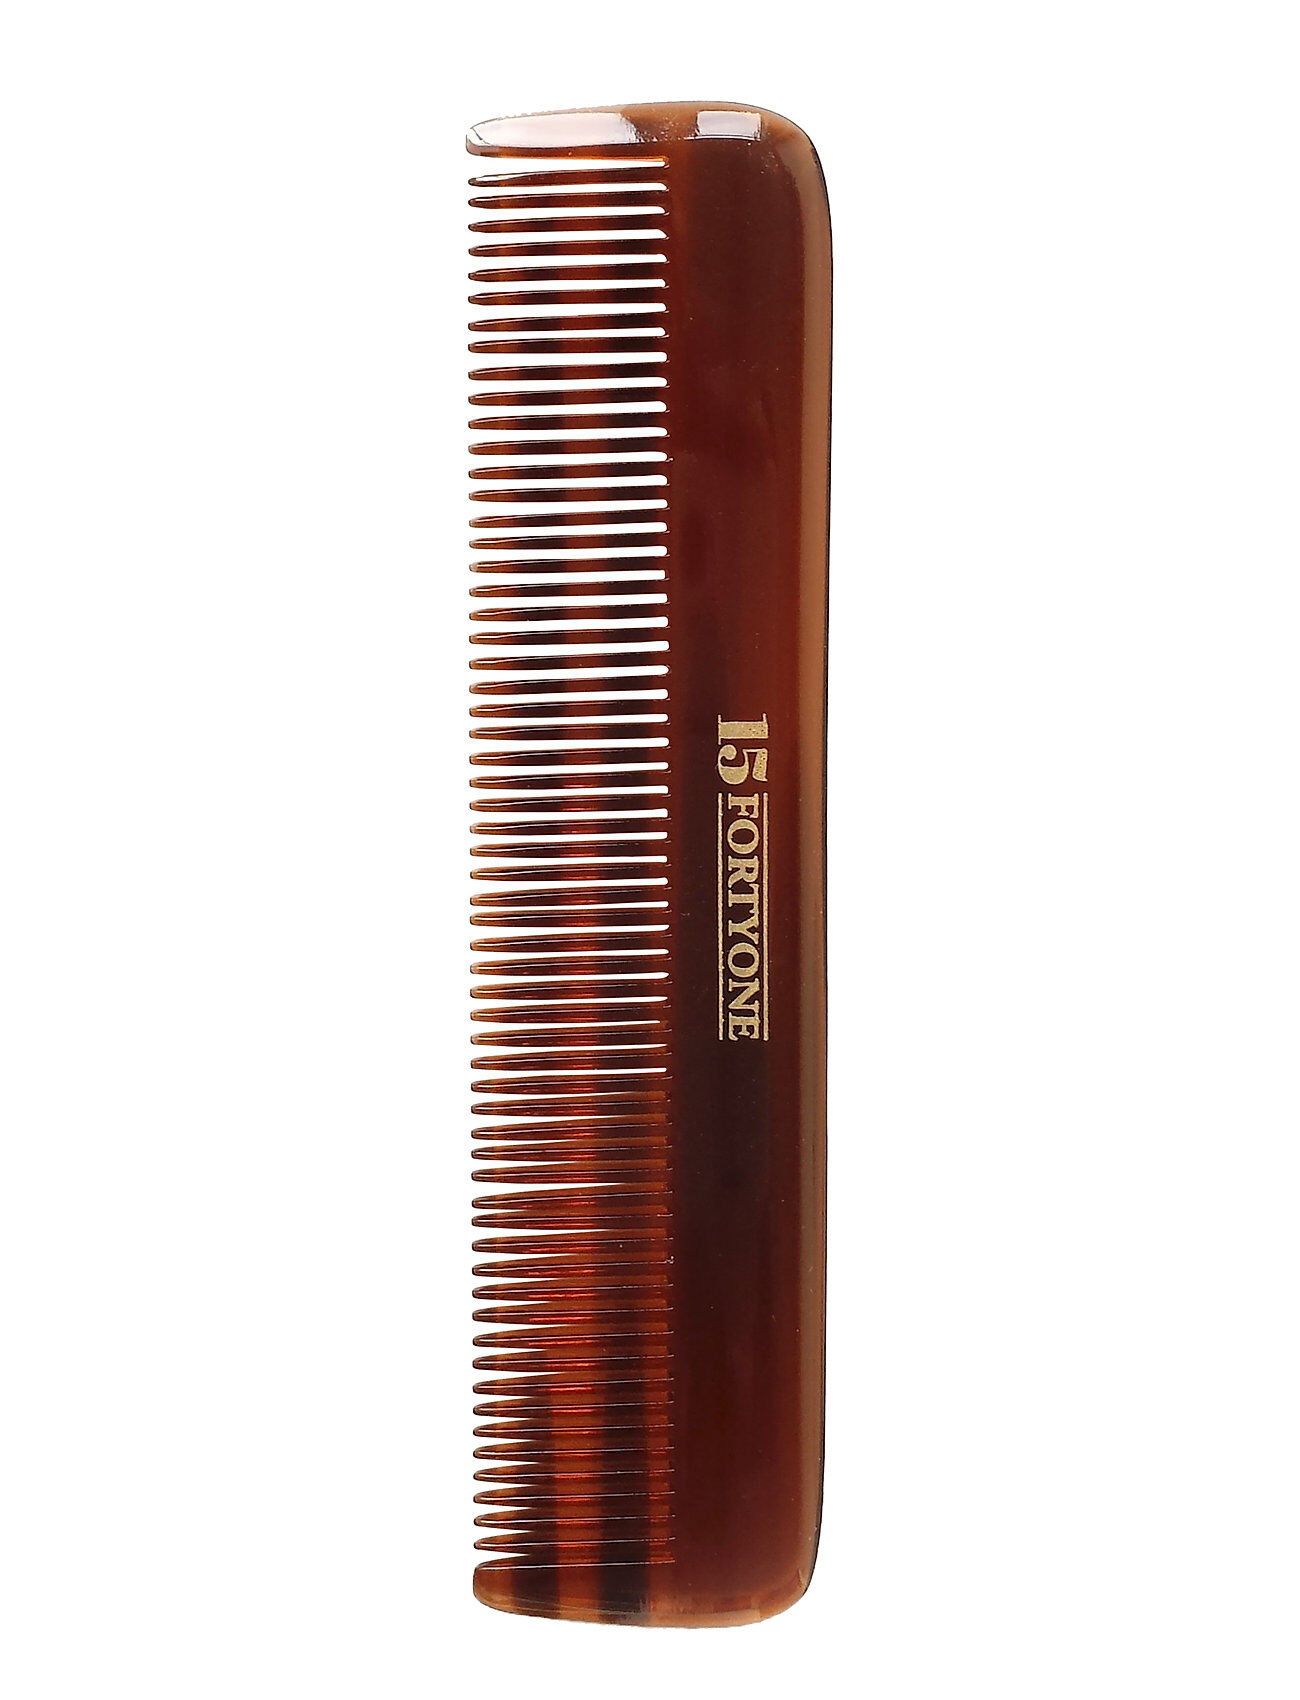 1541 of London Slim Pocket Comb Beauty MEN Hair Styling Combs And Brushes Brun 1541 Of London